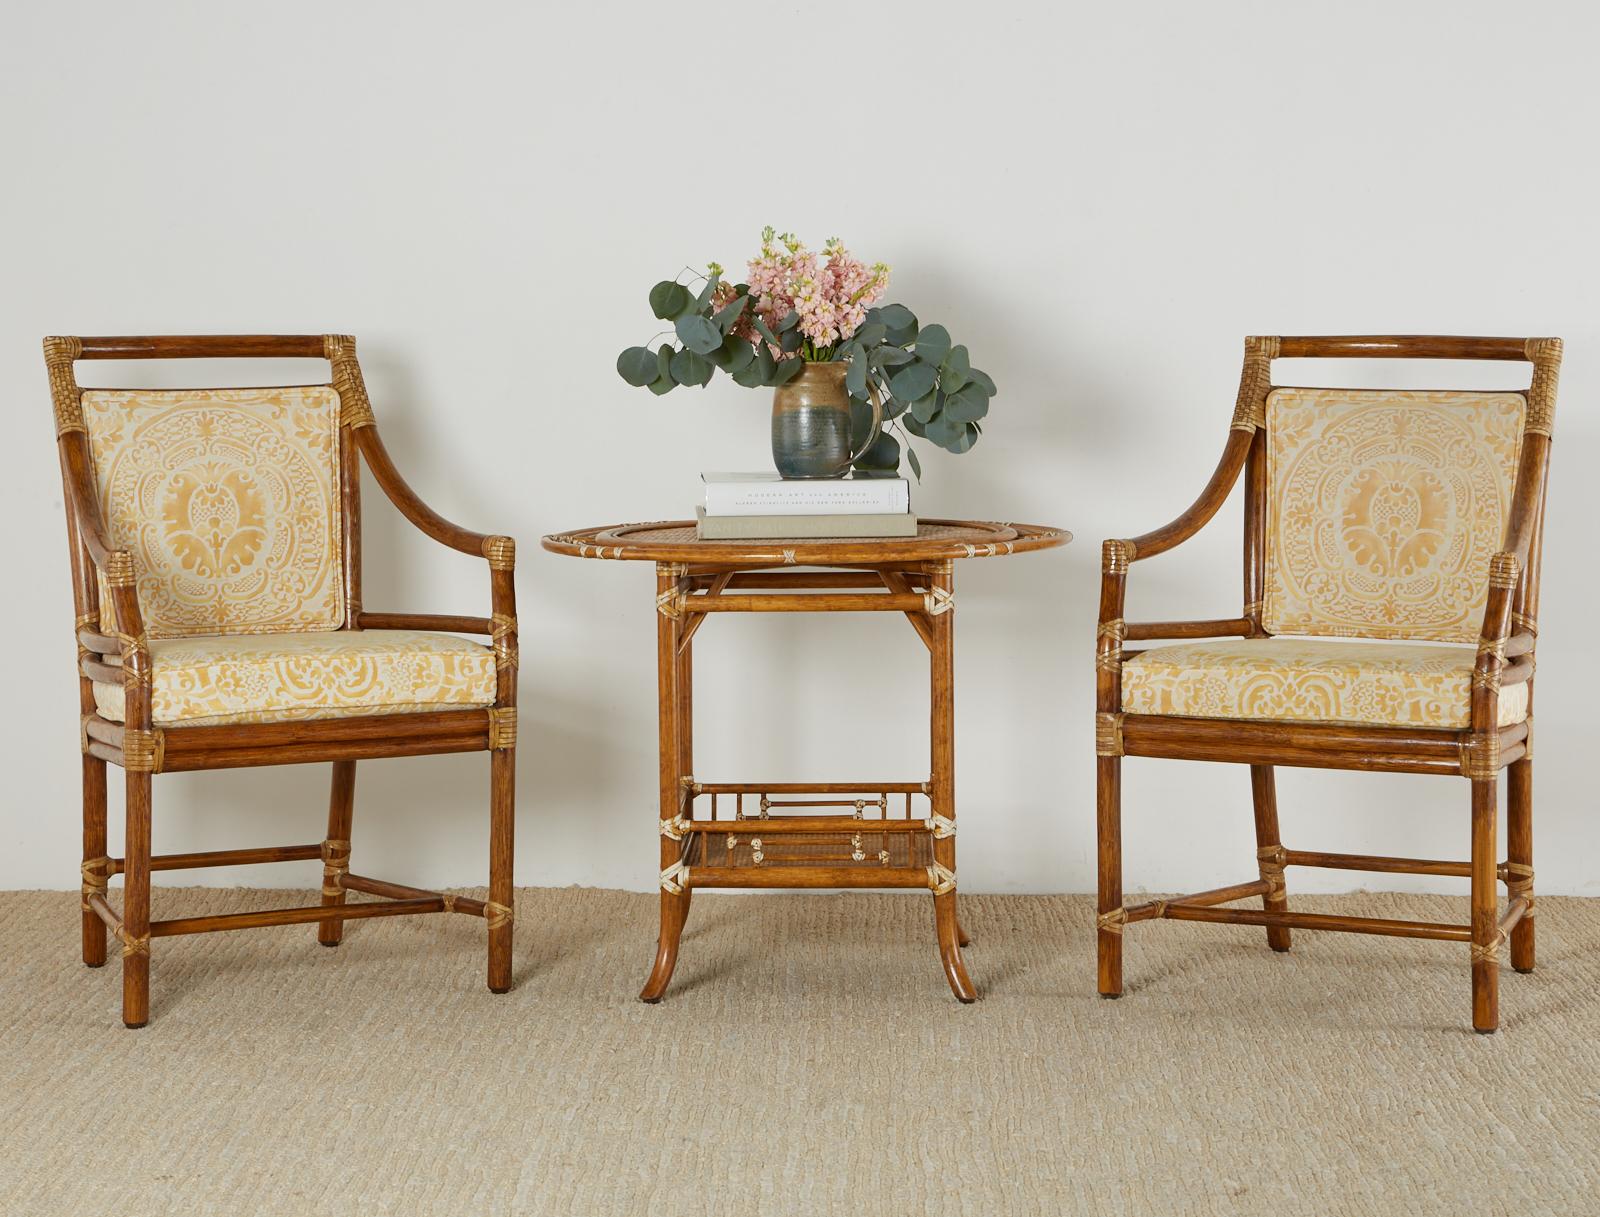 Attractive genuine McGuire occasional table or centre table featuring a round target style top. Constructed from rattan poles lashed together with leather rawhide laces in a lovely cream color. The top has decorative bamboo rings with a grasscloth